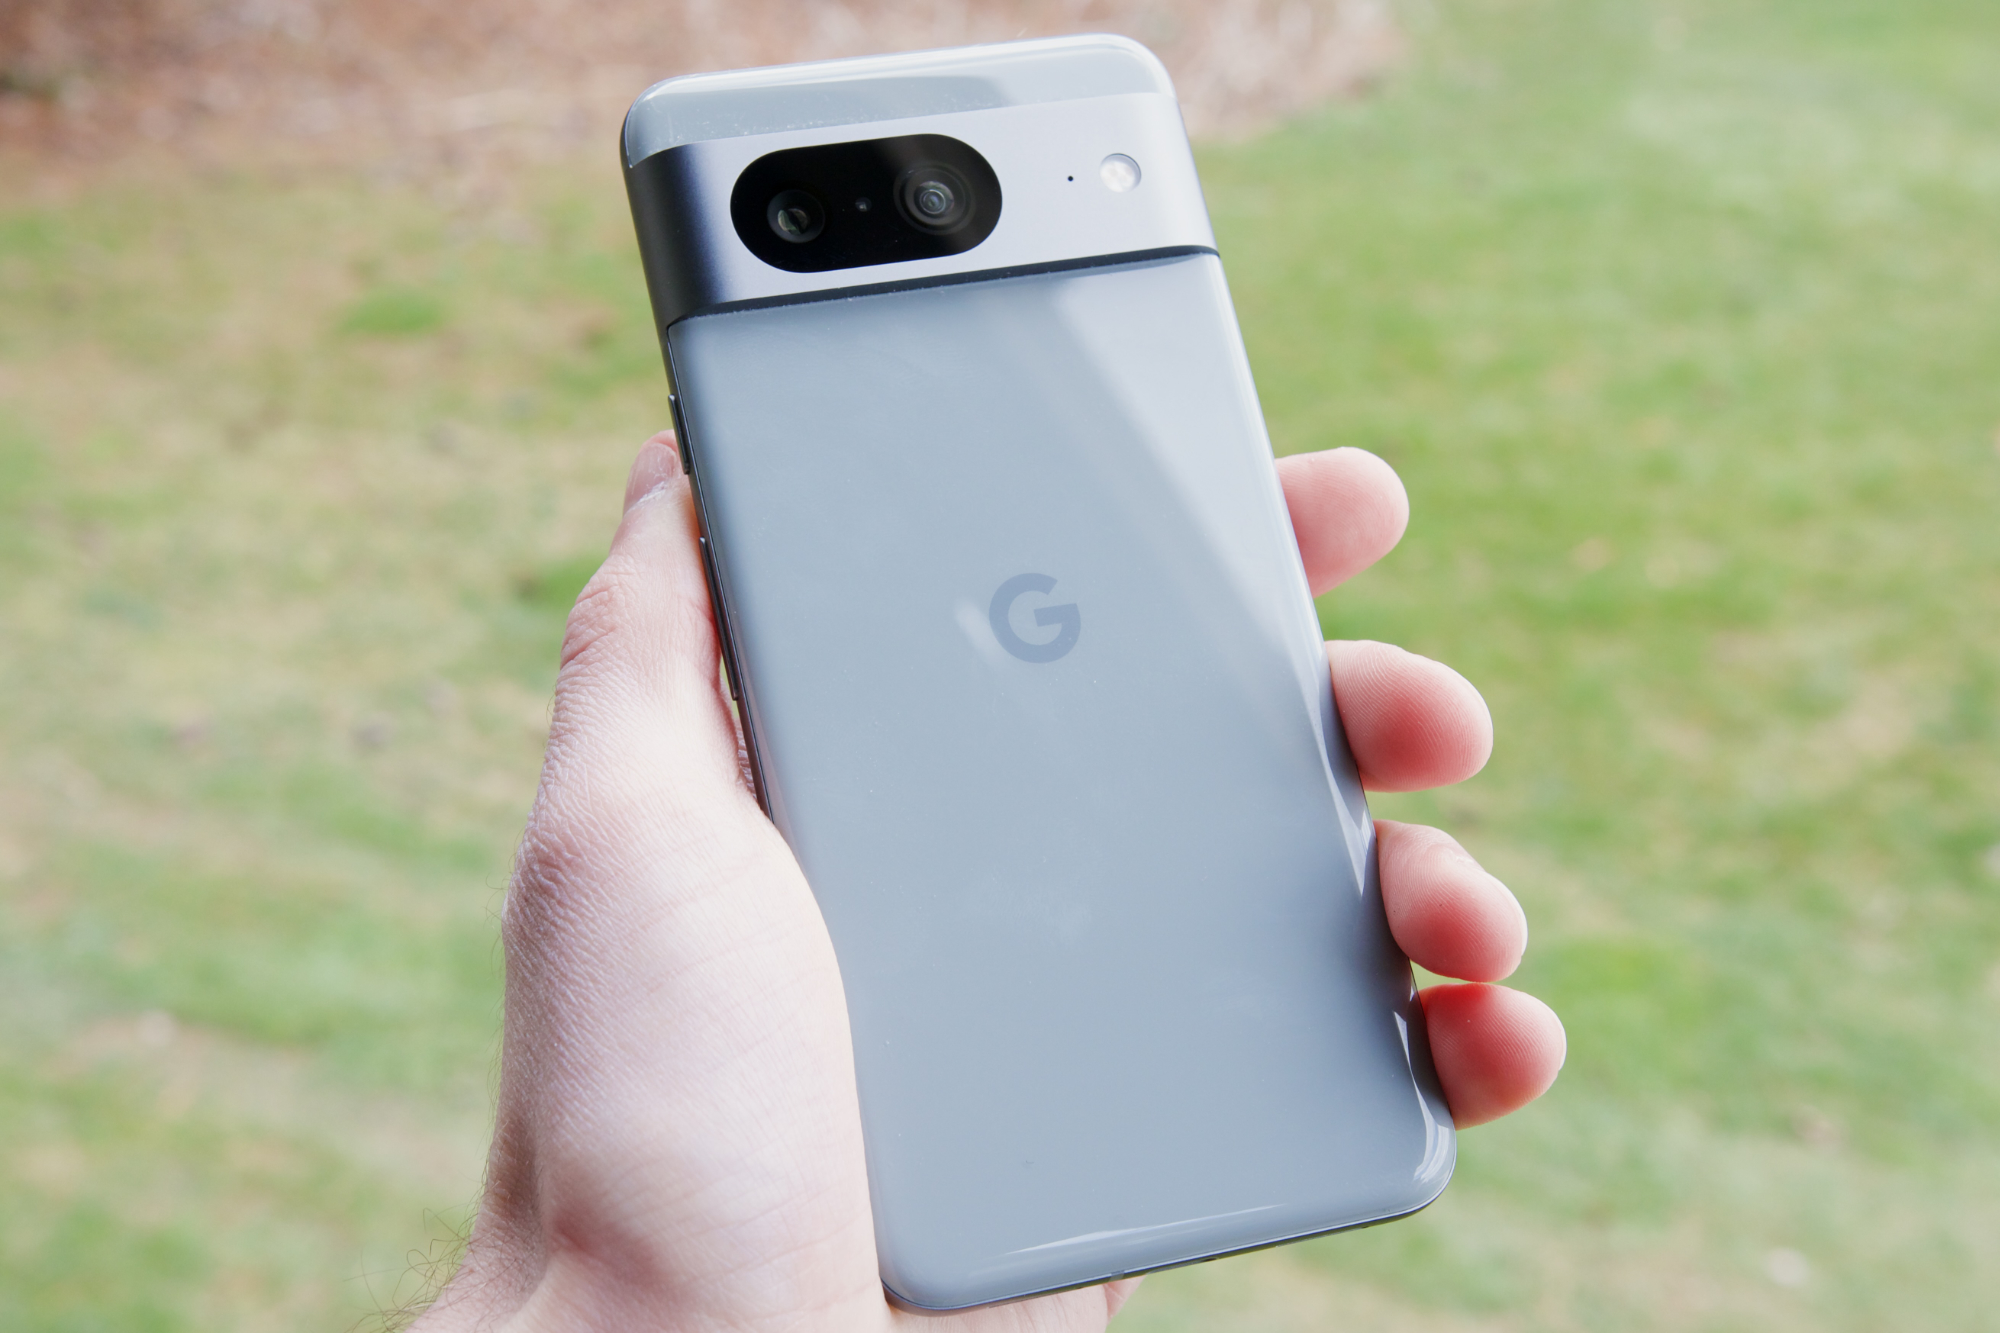 Someone holding the Google Pixel 8 outside, showing the back of the phone.